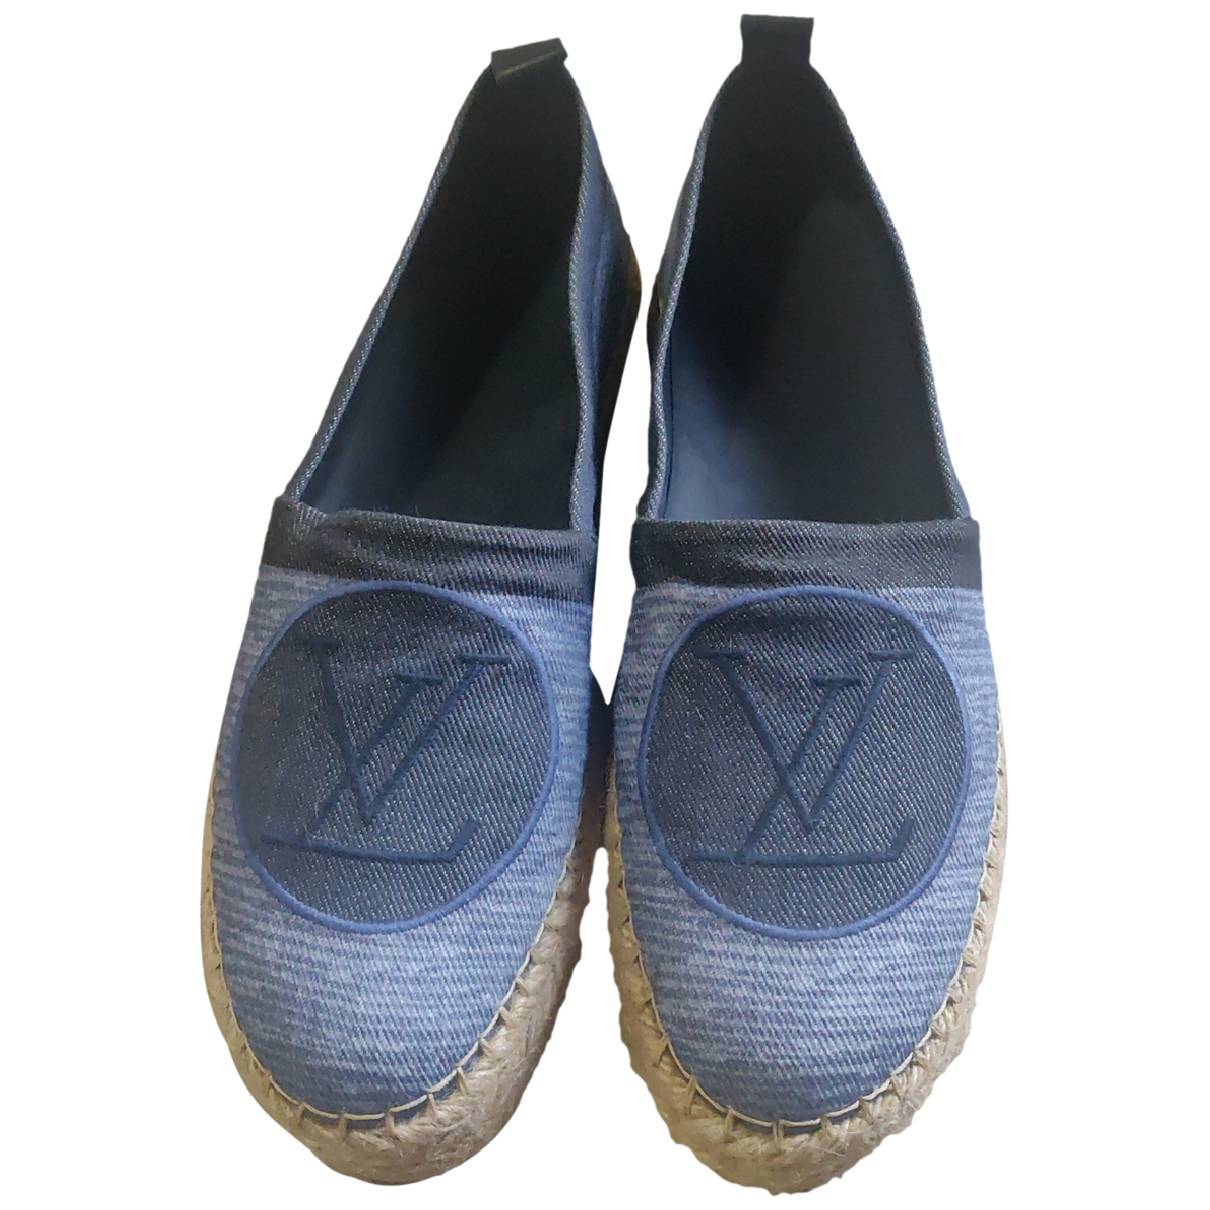 Starboard Flat Espadrille - Shoes